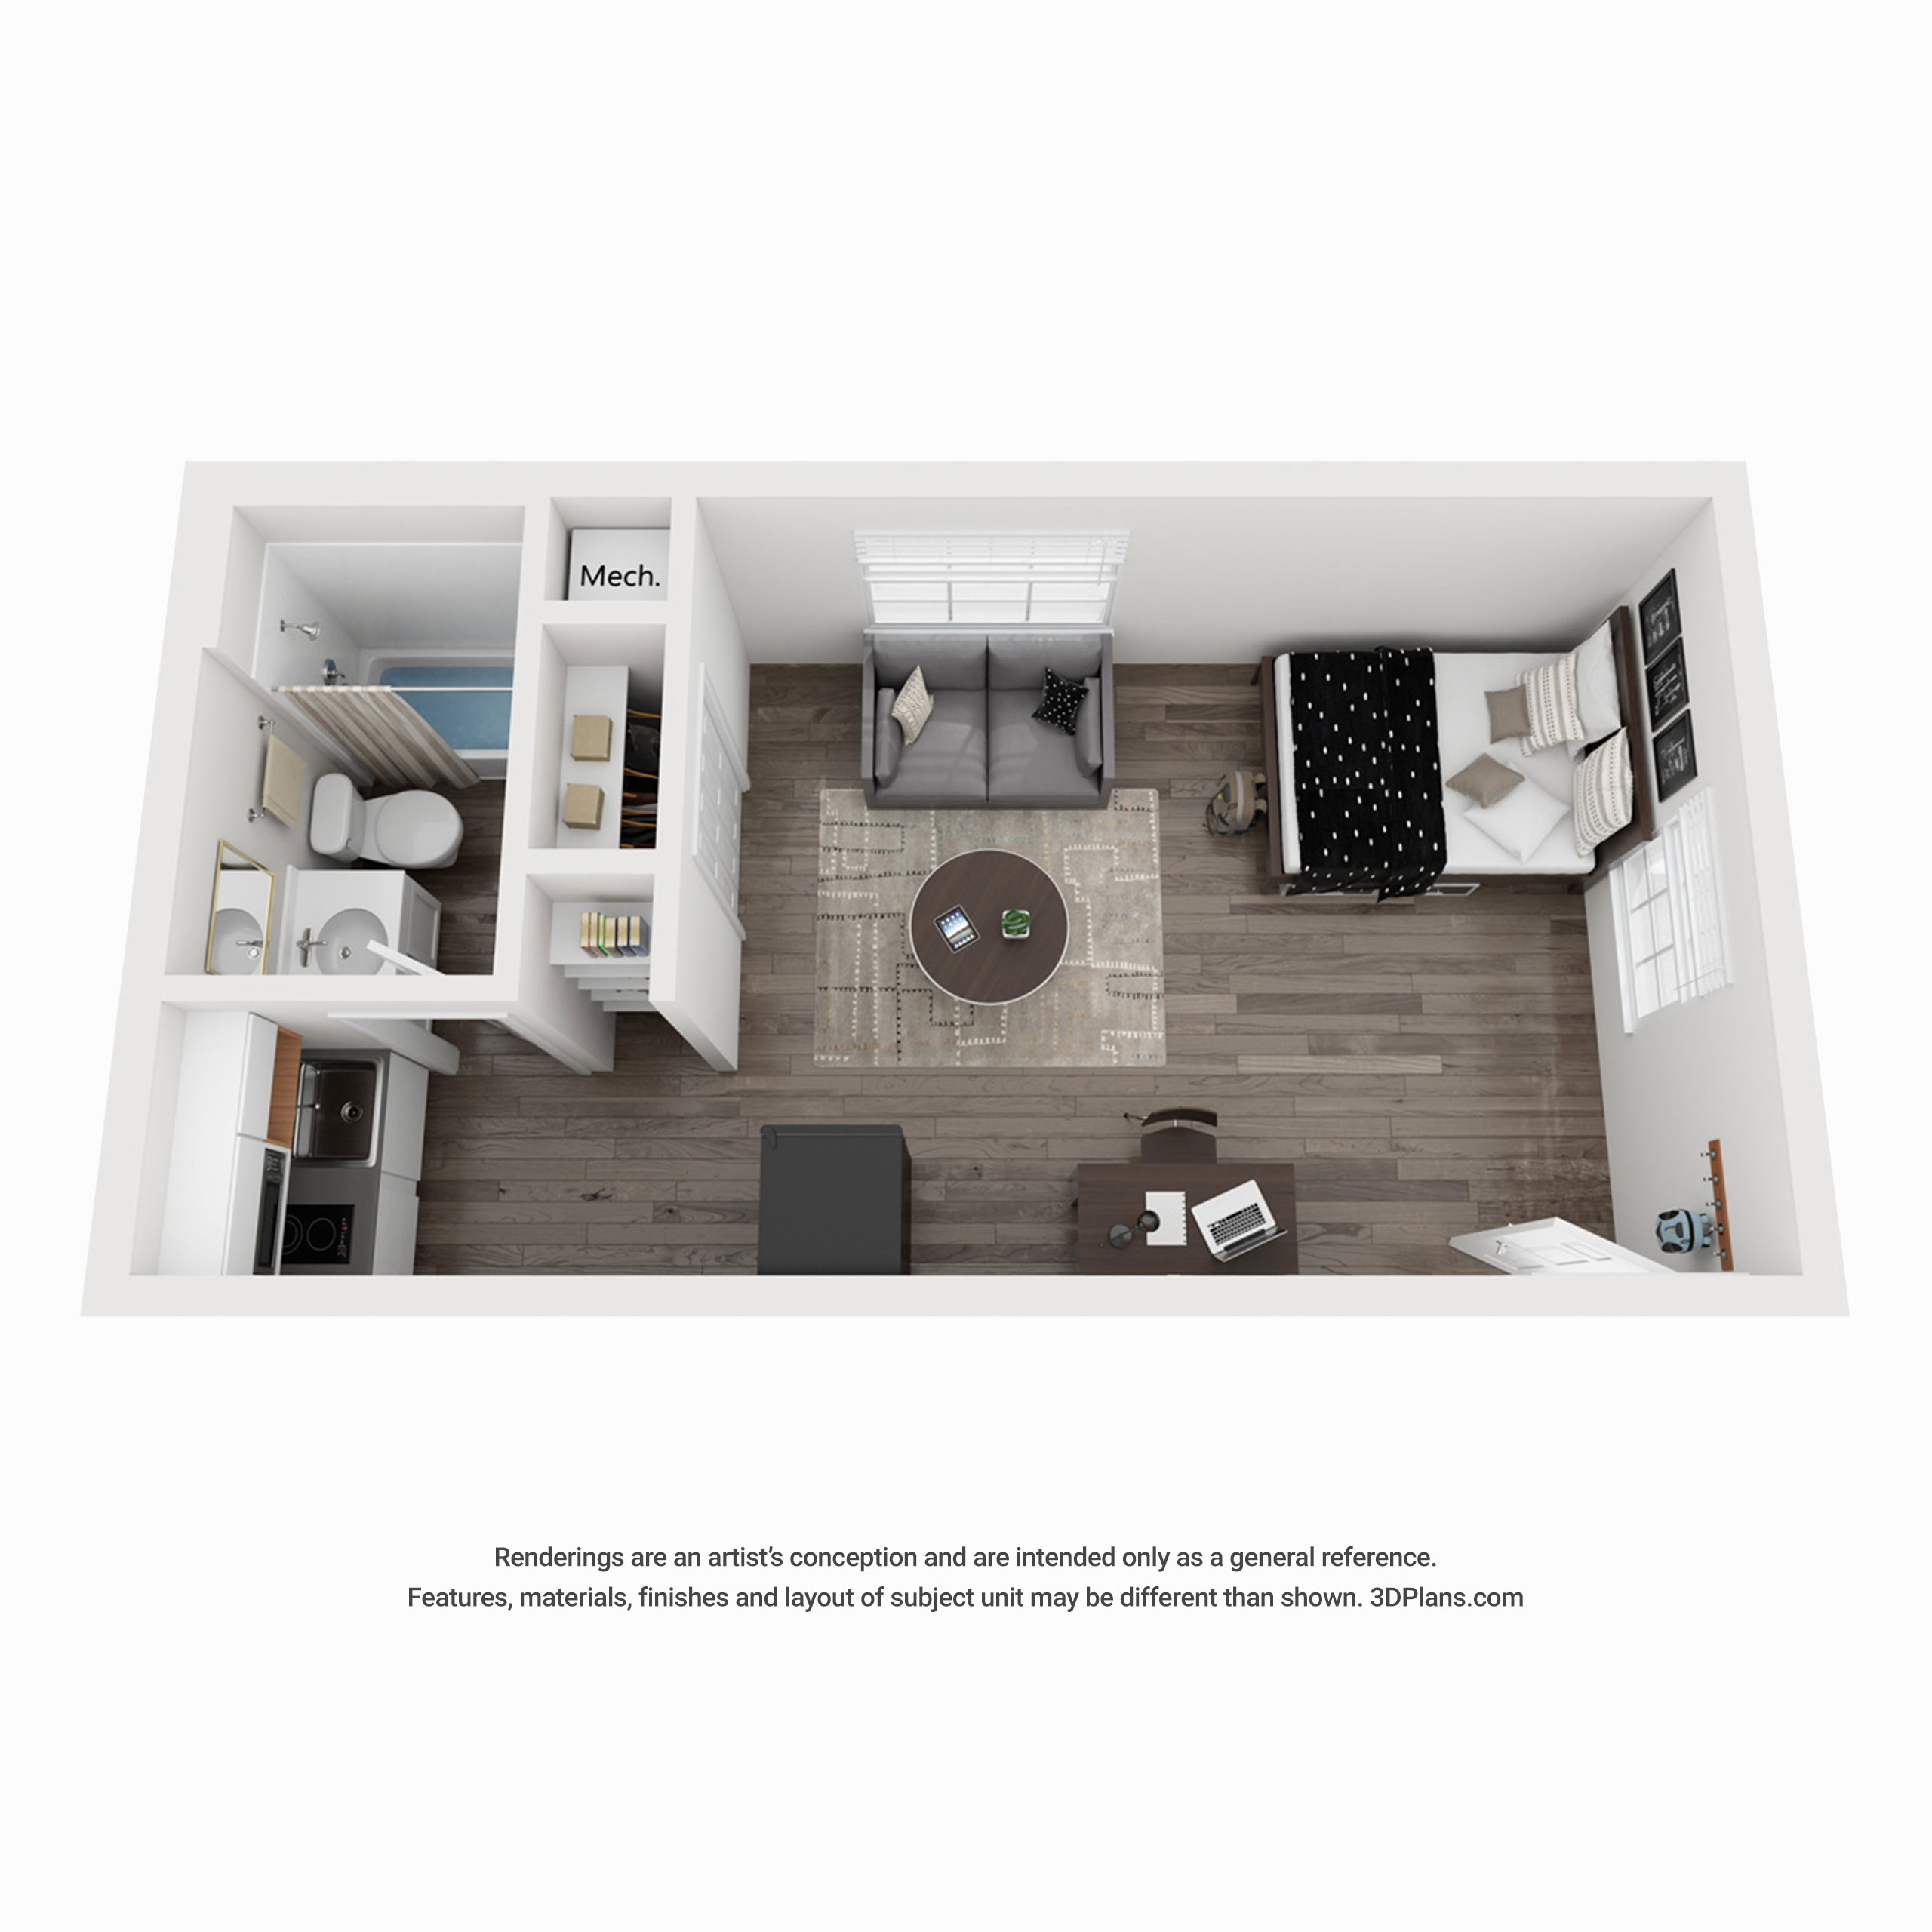 Studio S3 rendering of furnished apartment with bed, kitchenette and separate bathroom